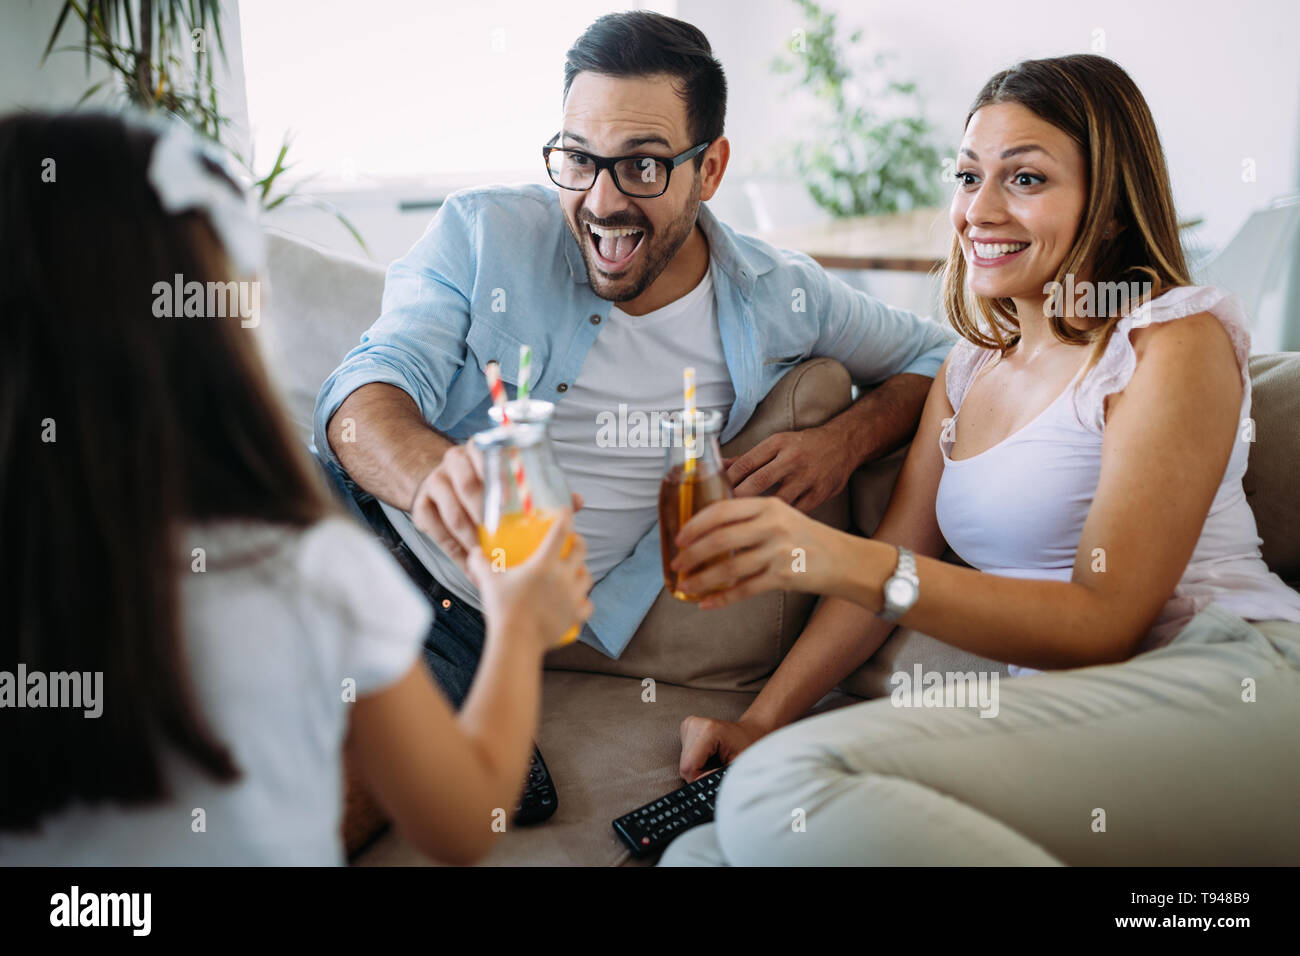 Happy family having fun time at home Stock Photo